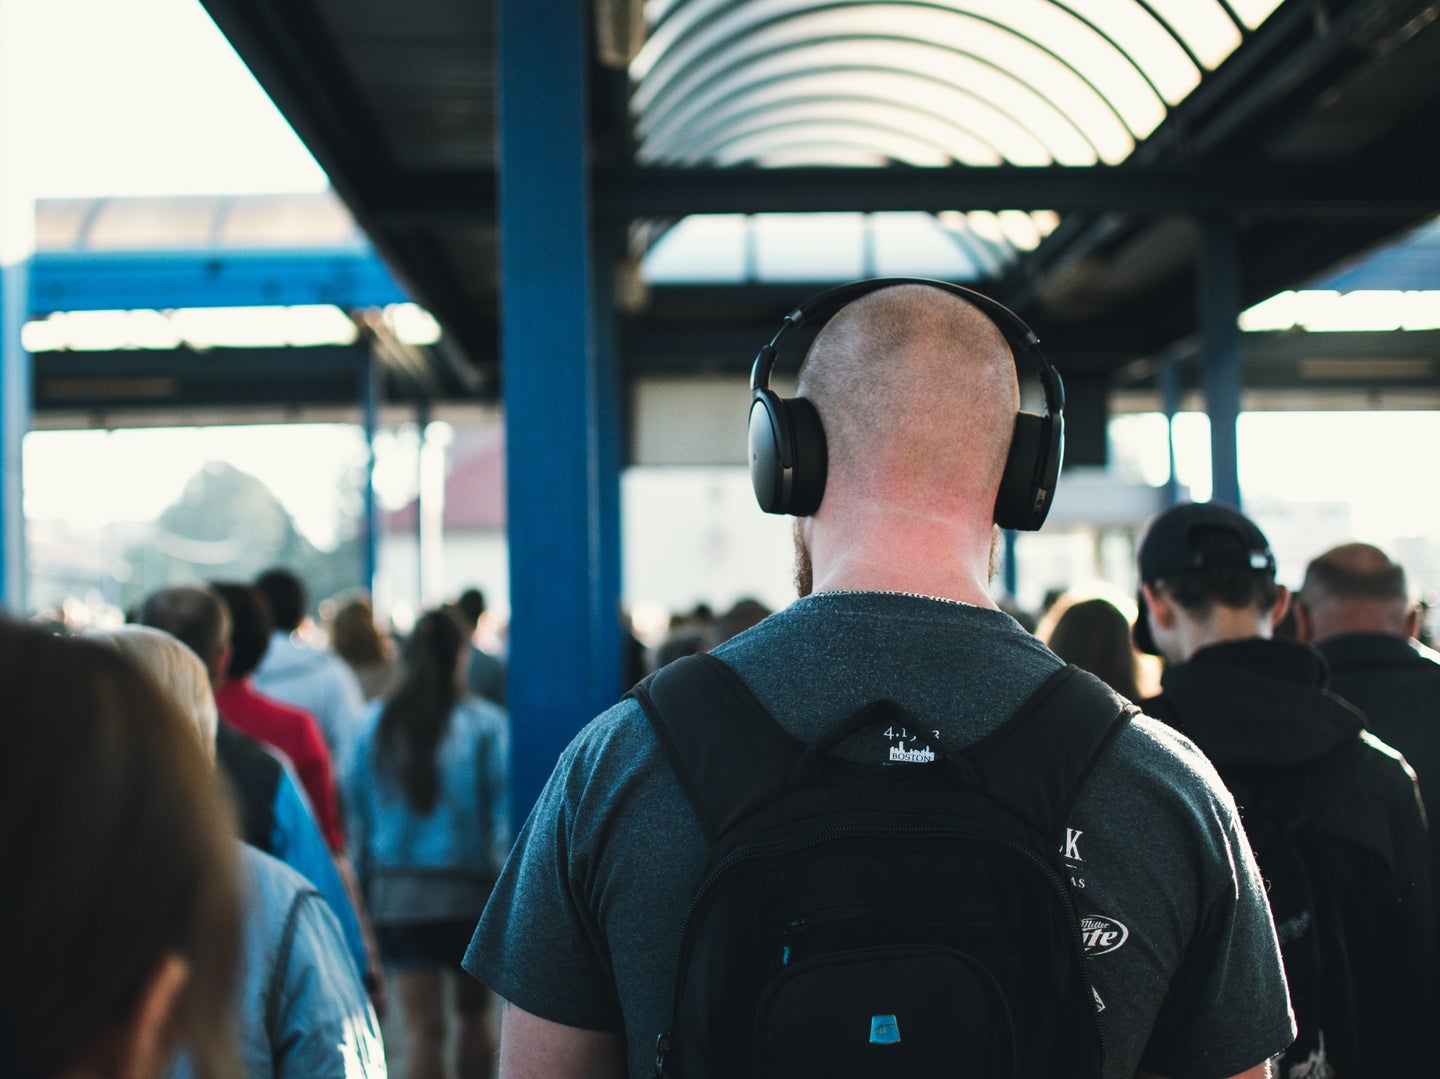 A bald man wearing headphones and a backpack in a crowded area, maybe a train station.